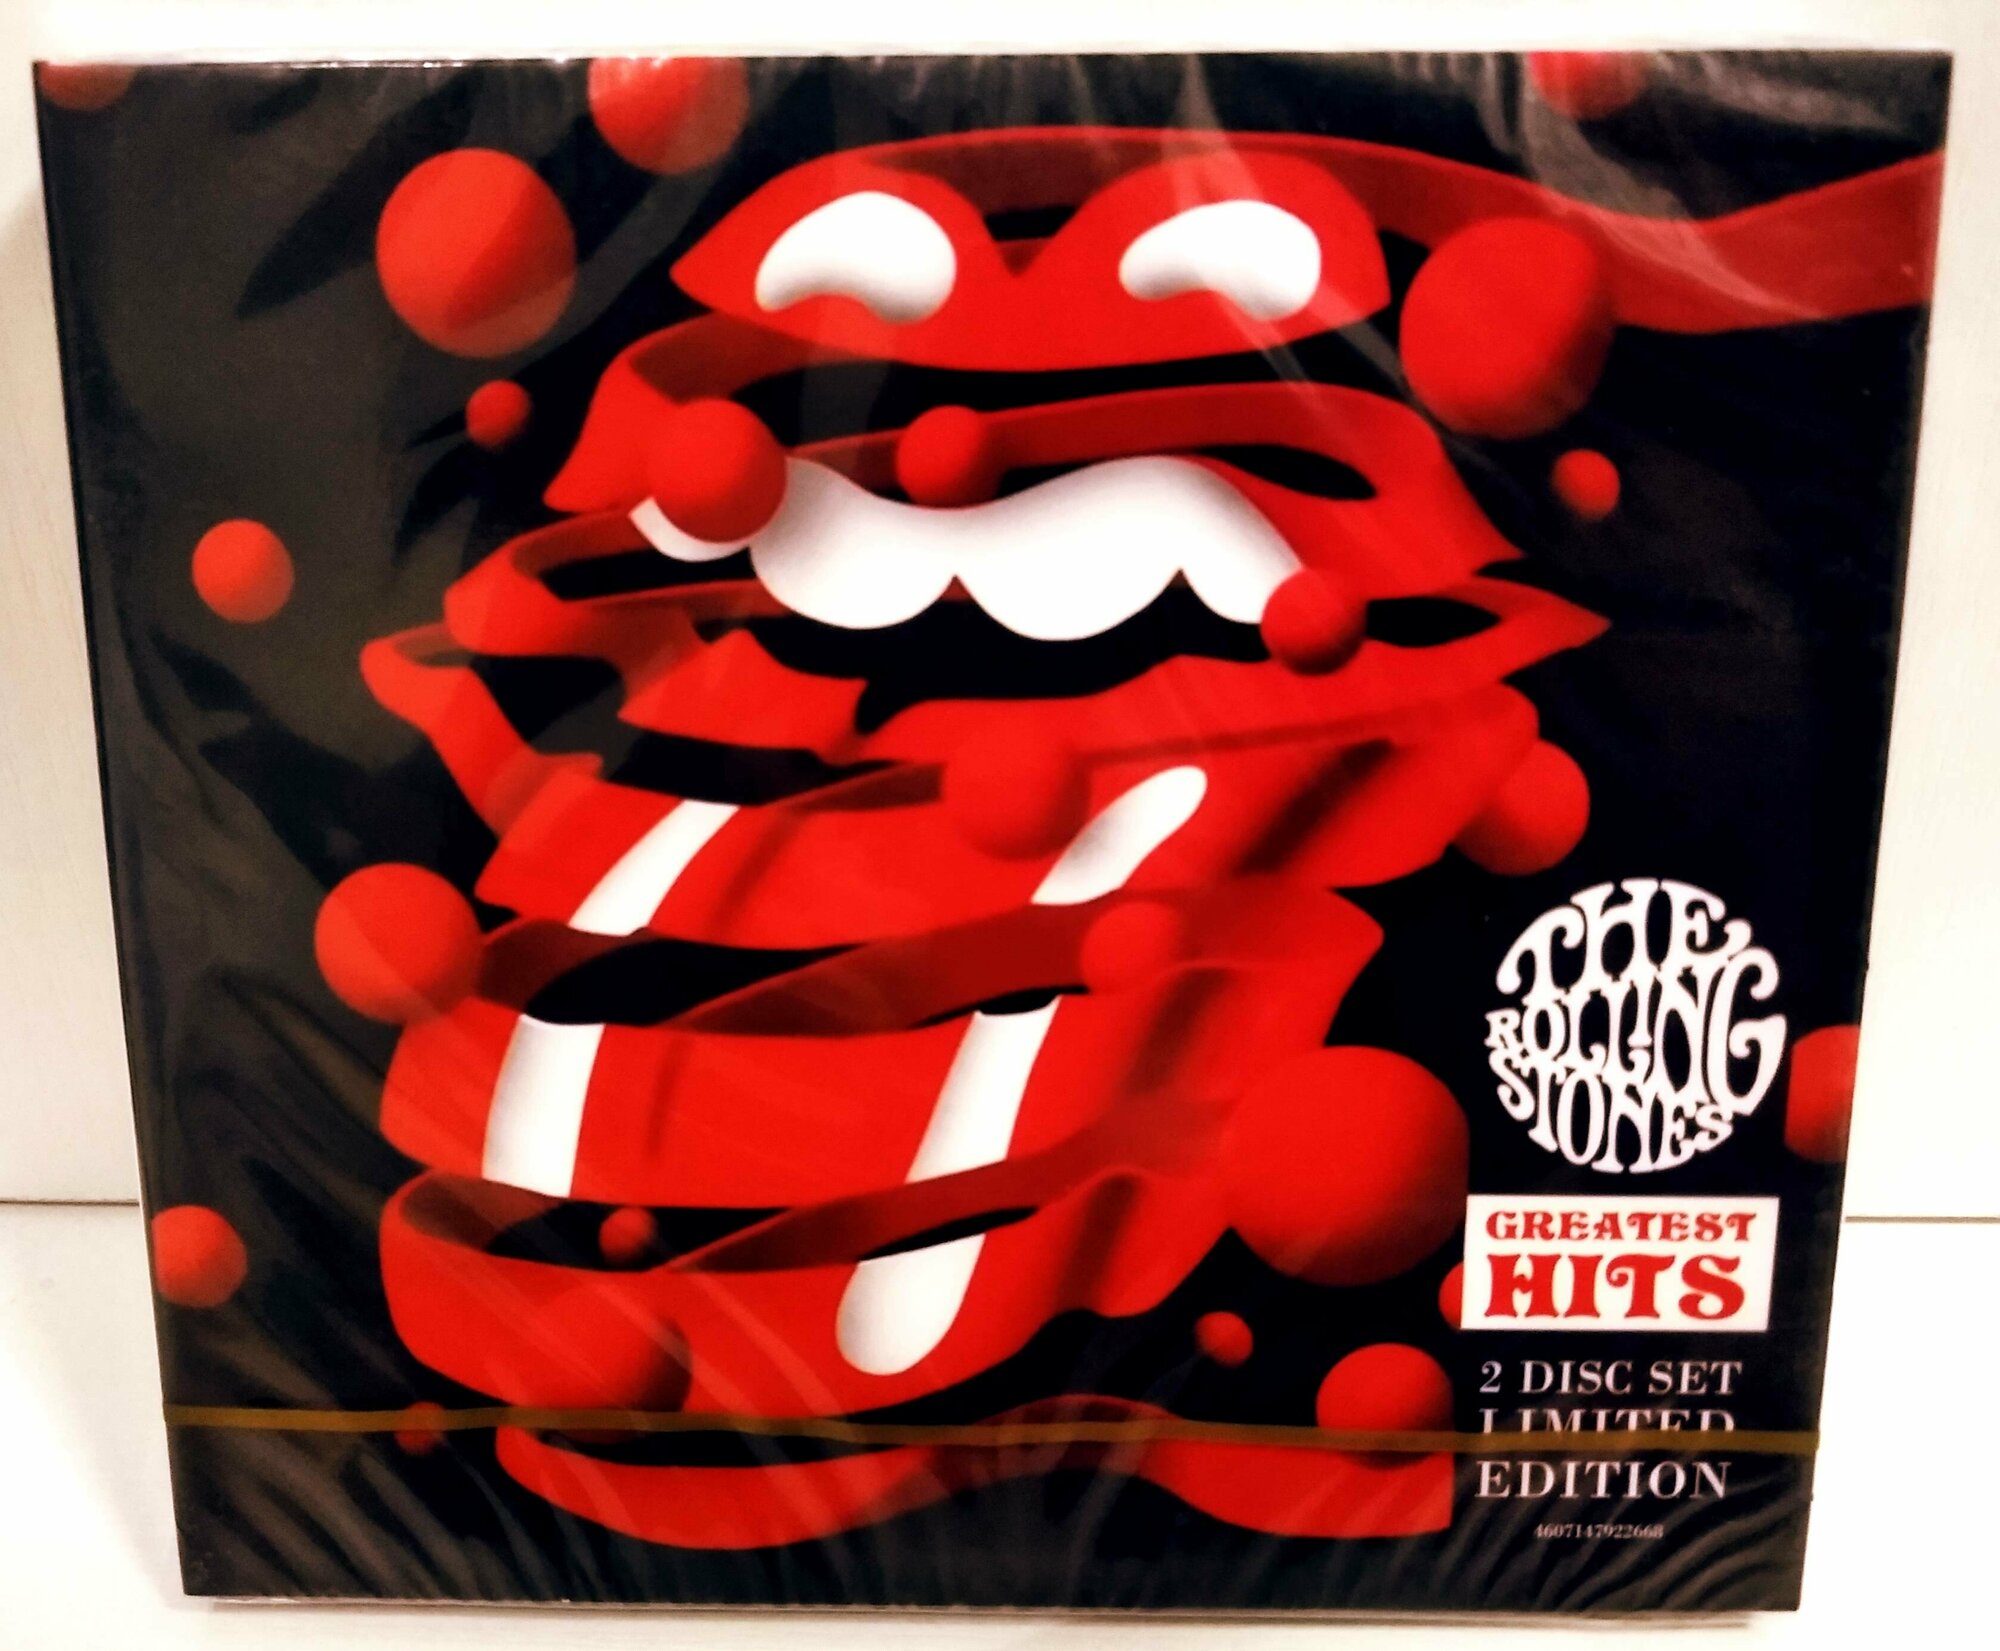 The Rolling Stones "Greatest Hits" 2 CD